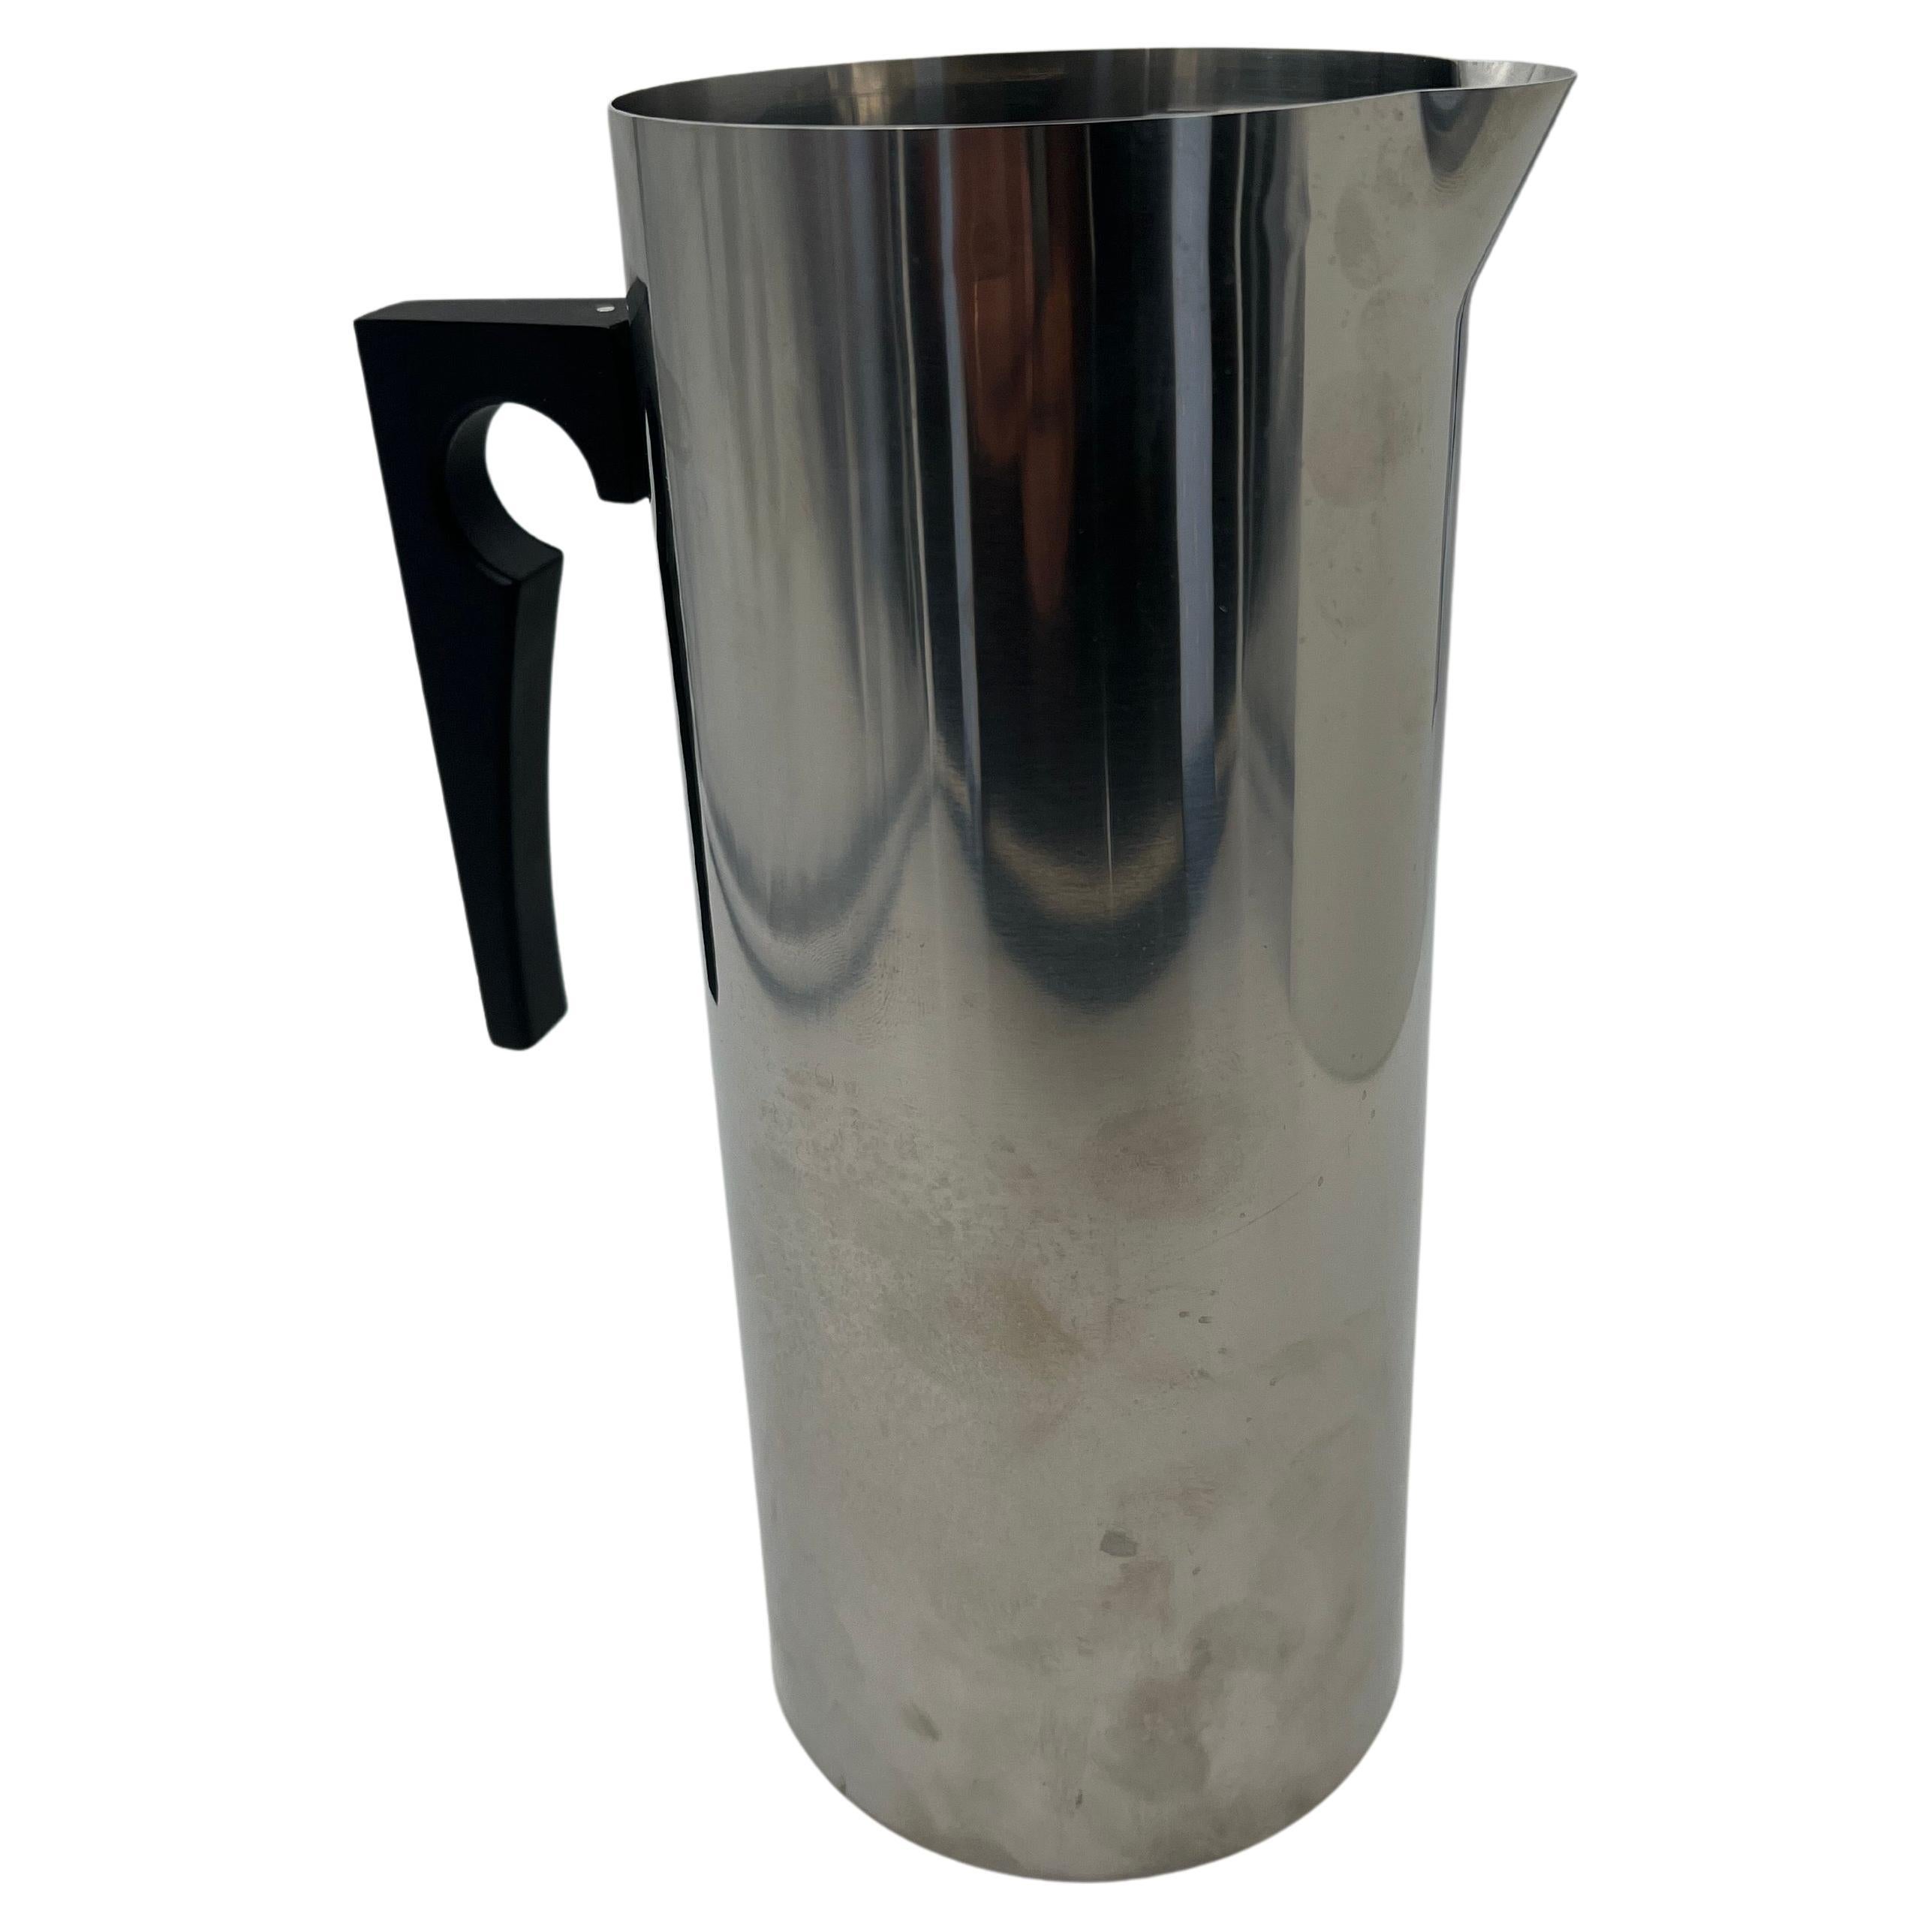 The design of the Arne Jacobsen jug with ice lip makes it practical for everyday use and special occasions. The jug made of stainless steel holds water and has a clever ice lip to keep the ice cubes in the jug and the water chilled. The jug is part